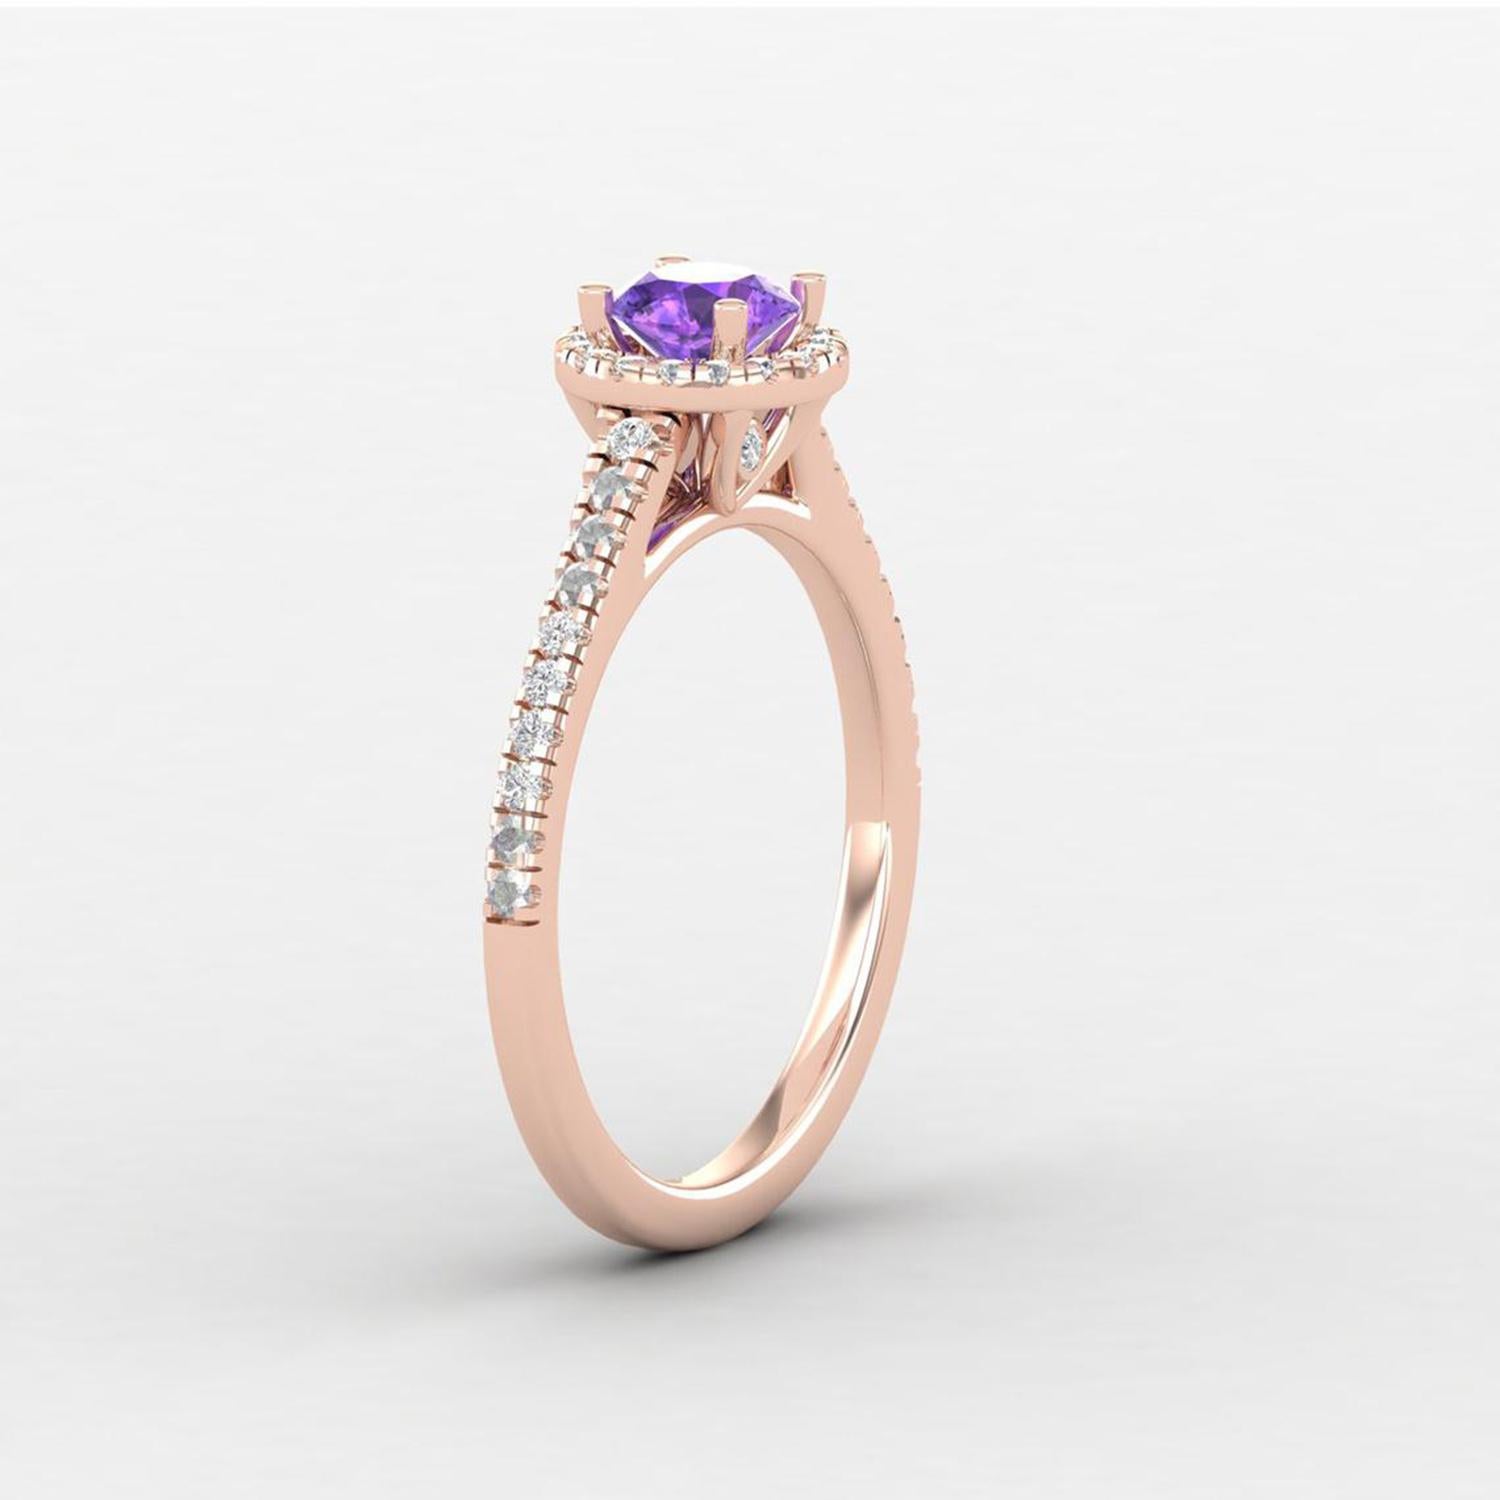 Modern 14 K Gold 5mm Amethyst Ring / Diamond Solitaire Ring / Engagement Ring for Her For Sale